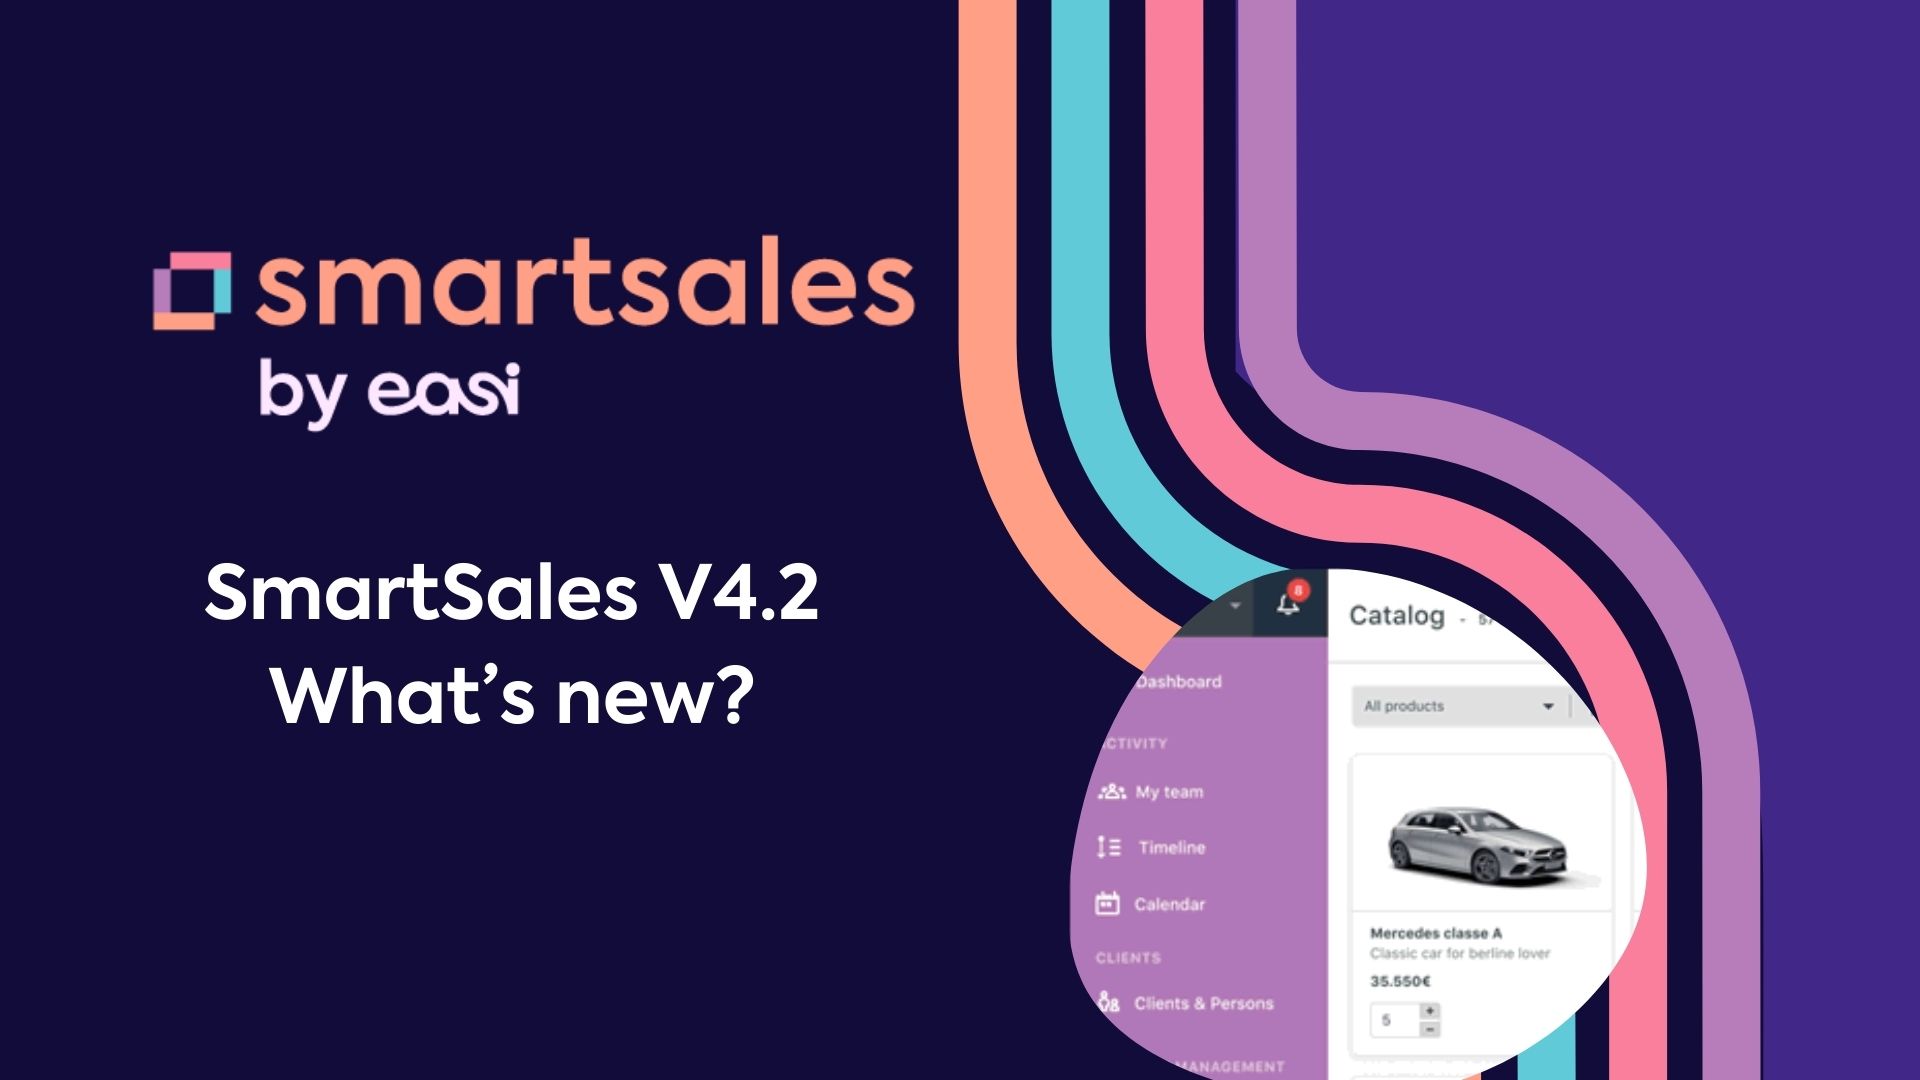 SmartSales V4.2: What's new?